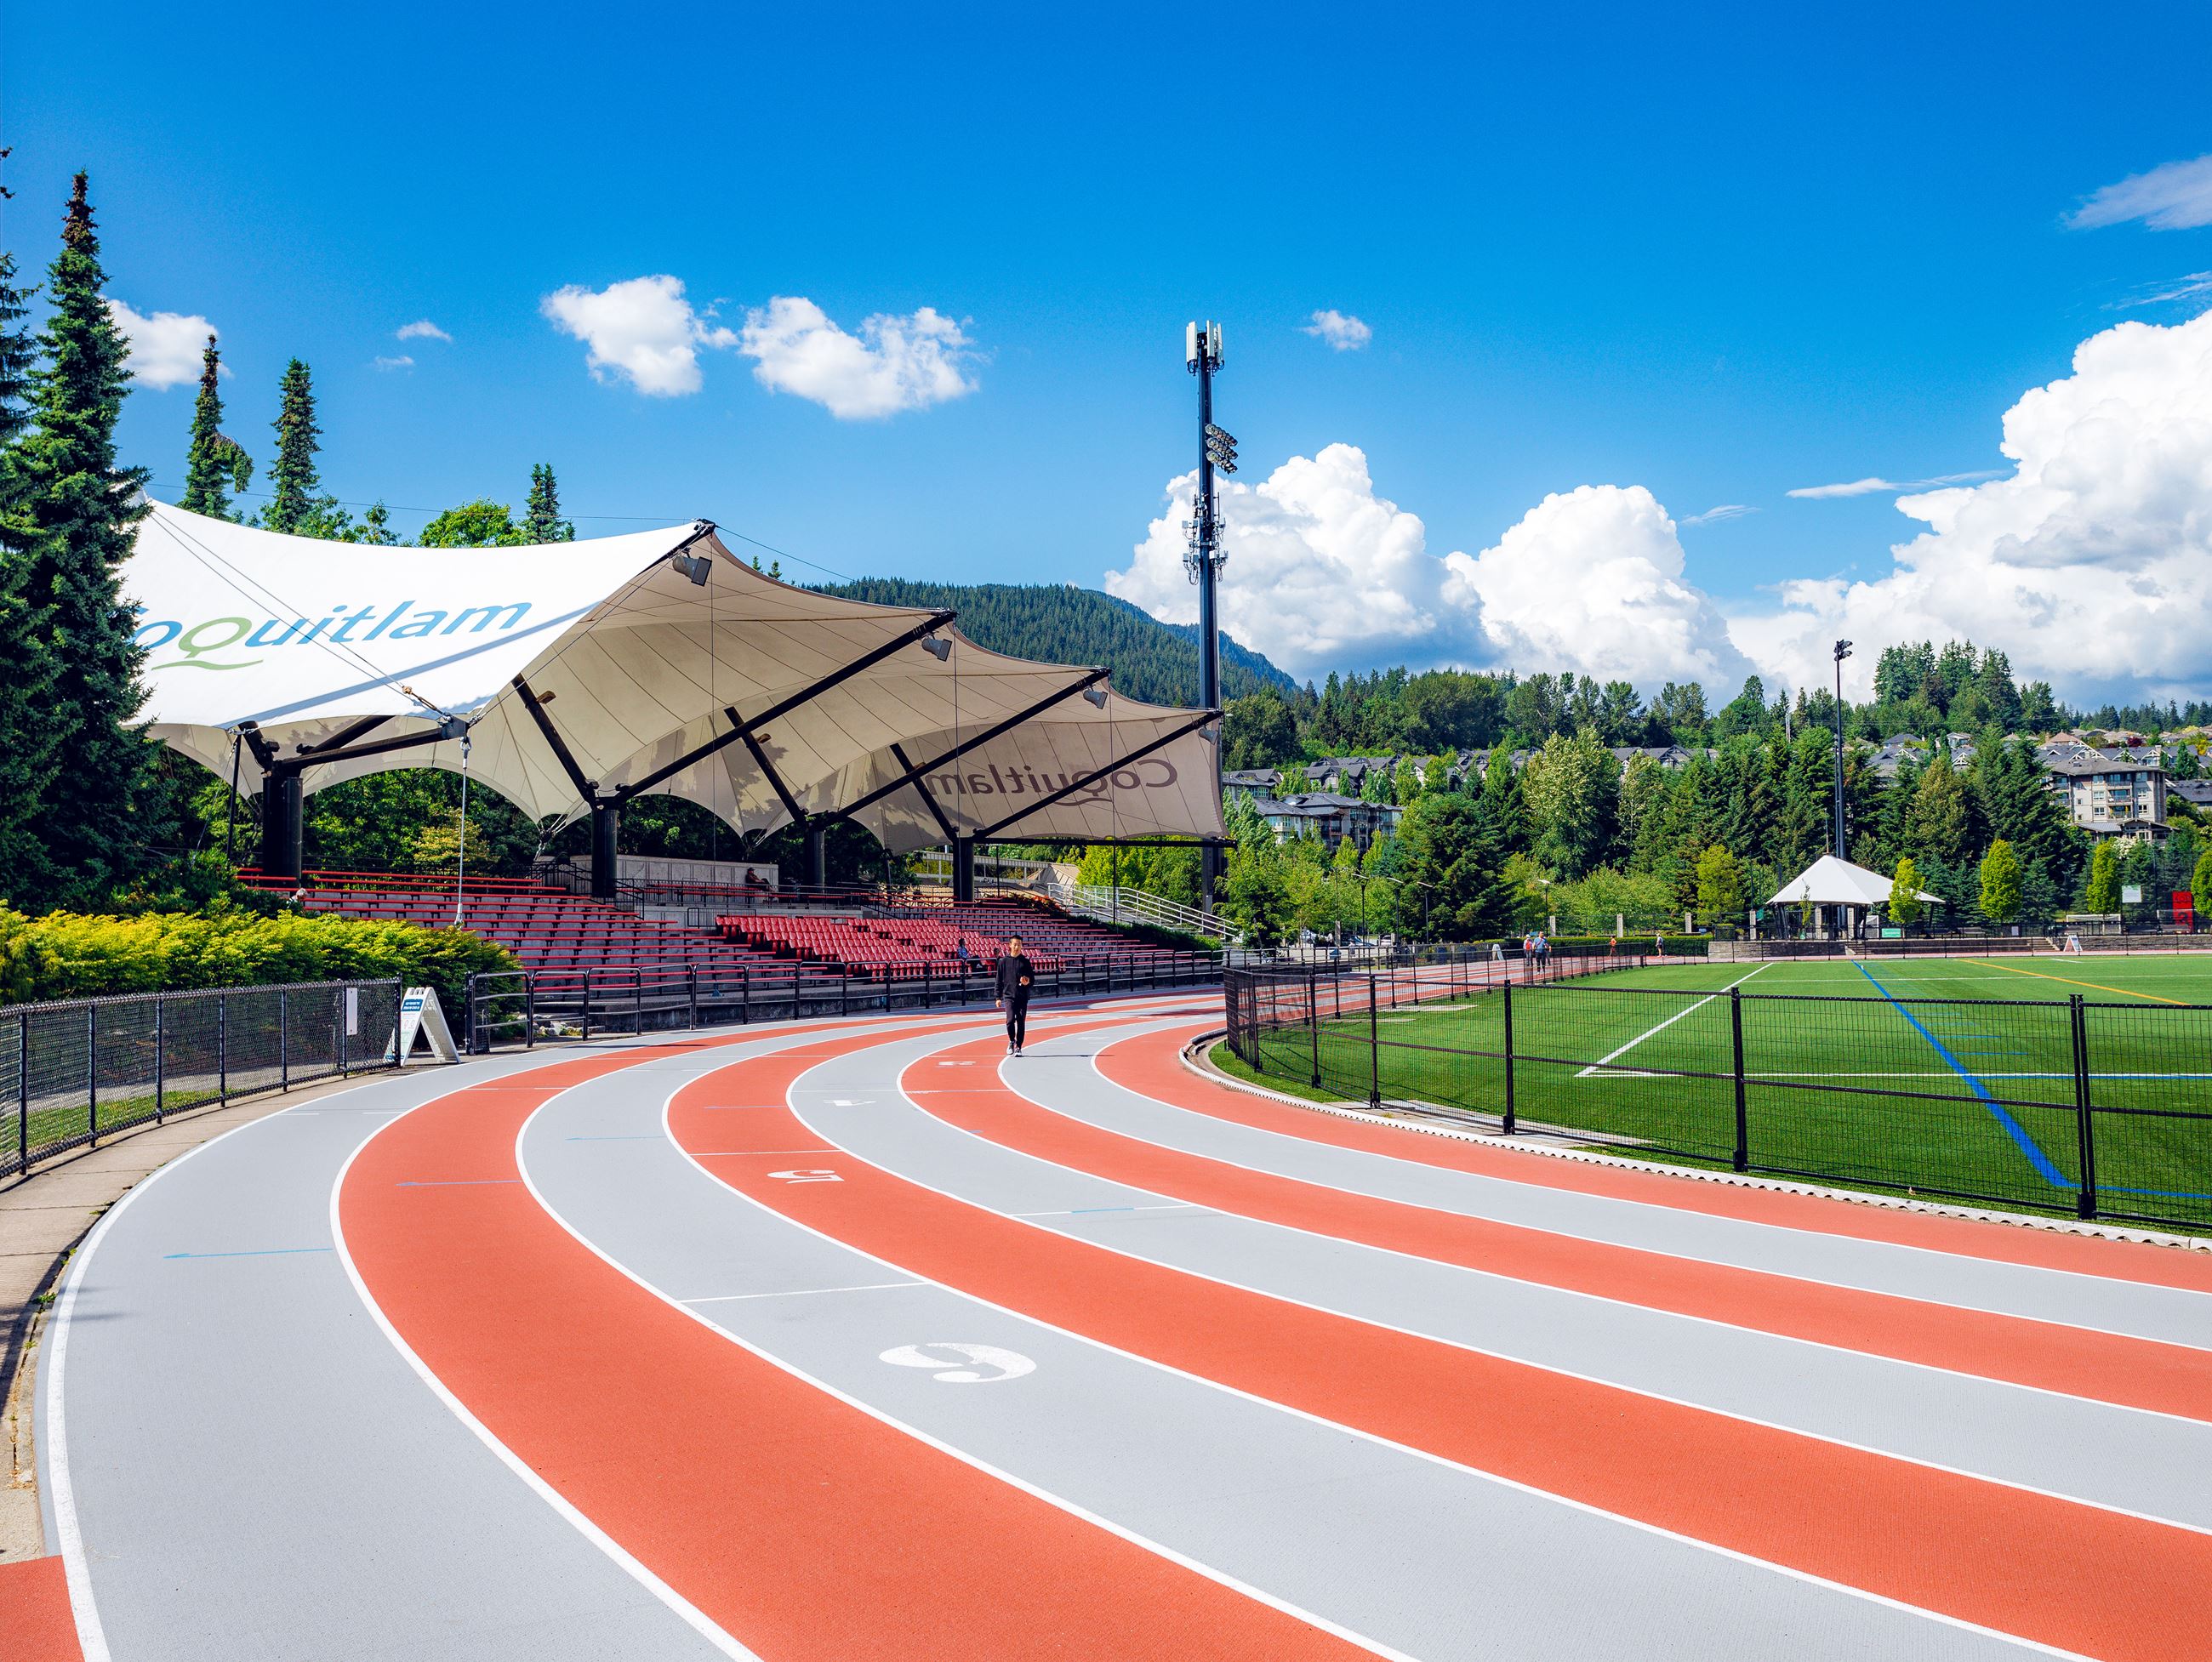 The rubber track at Coquitlam's Percy Perry Stadium